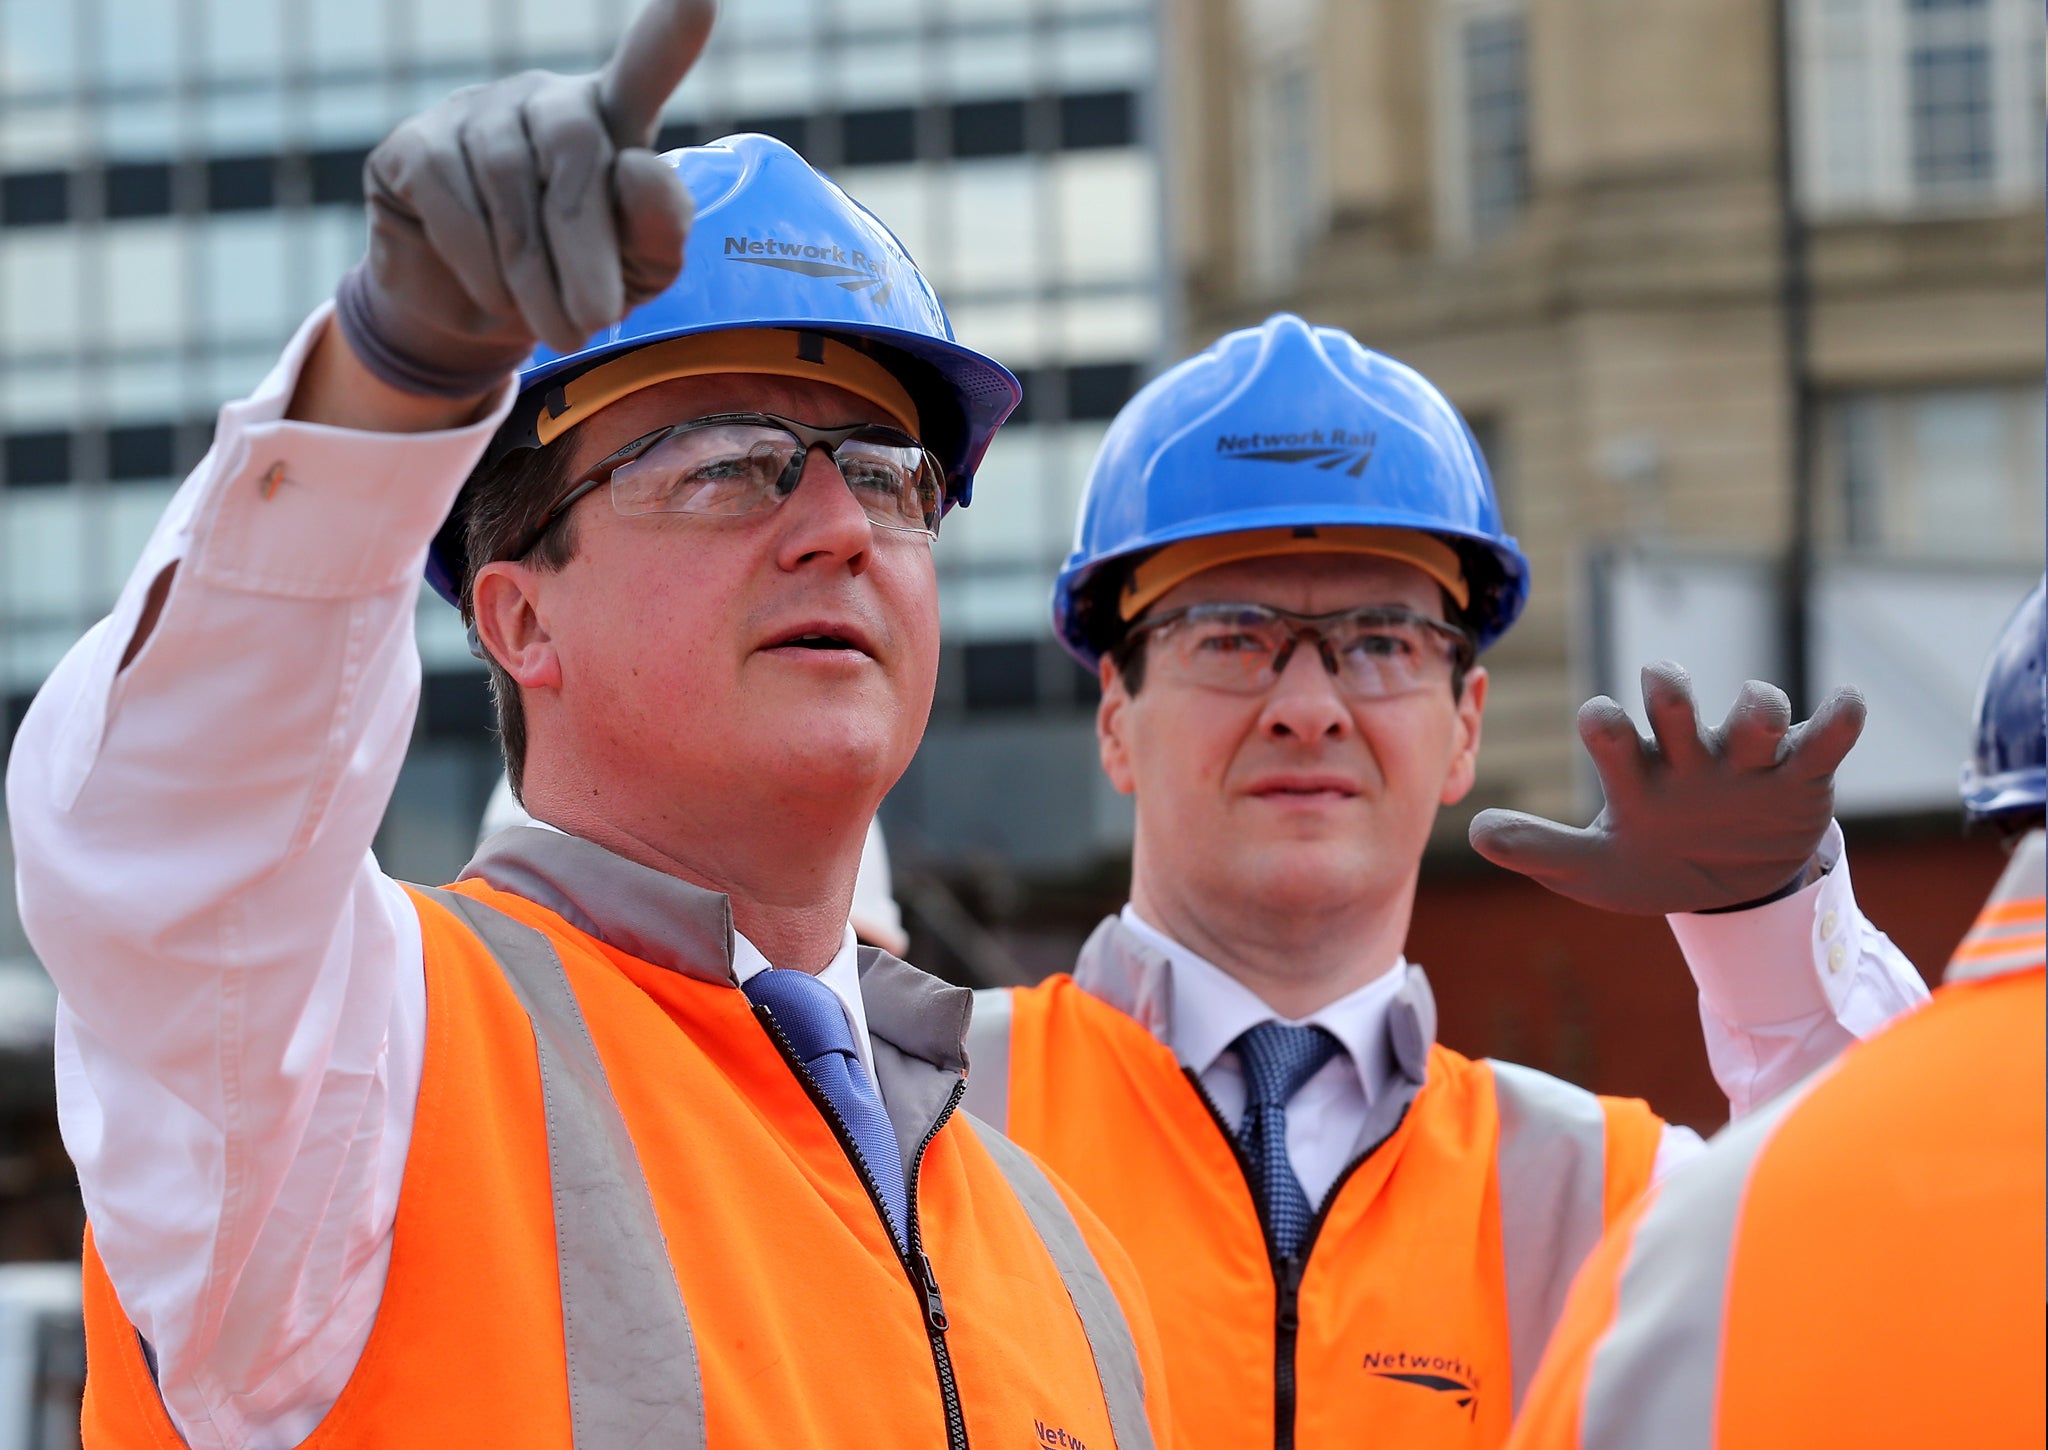 David Cameron and George Osborne tour building works at Manchester's Victoria Railway Station